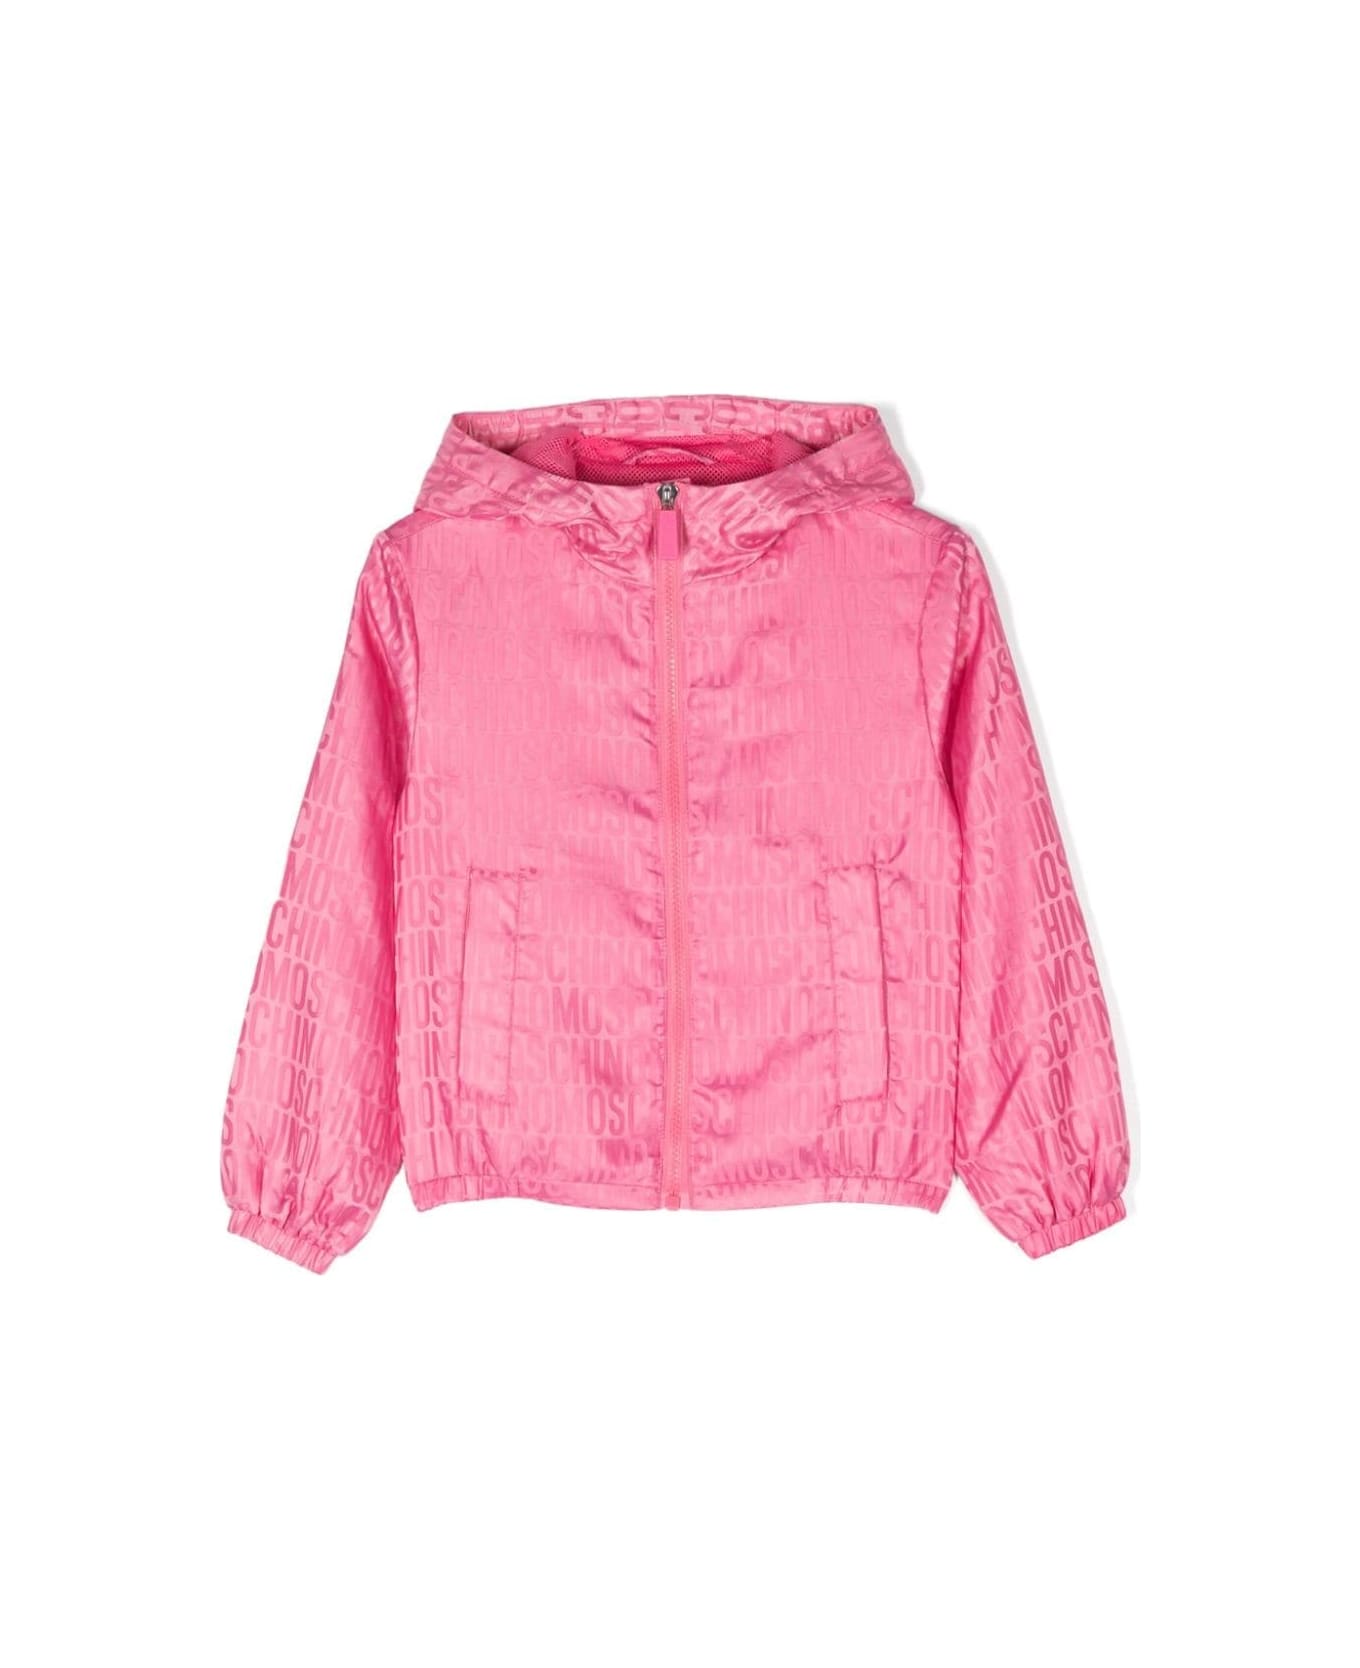 Moschino Pink Windbreaker Jacket With All-over Jacquard Logo - Pink コート＆ジャケット